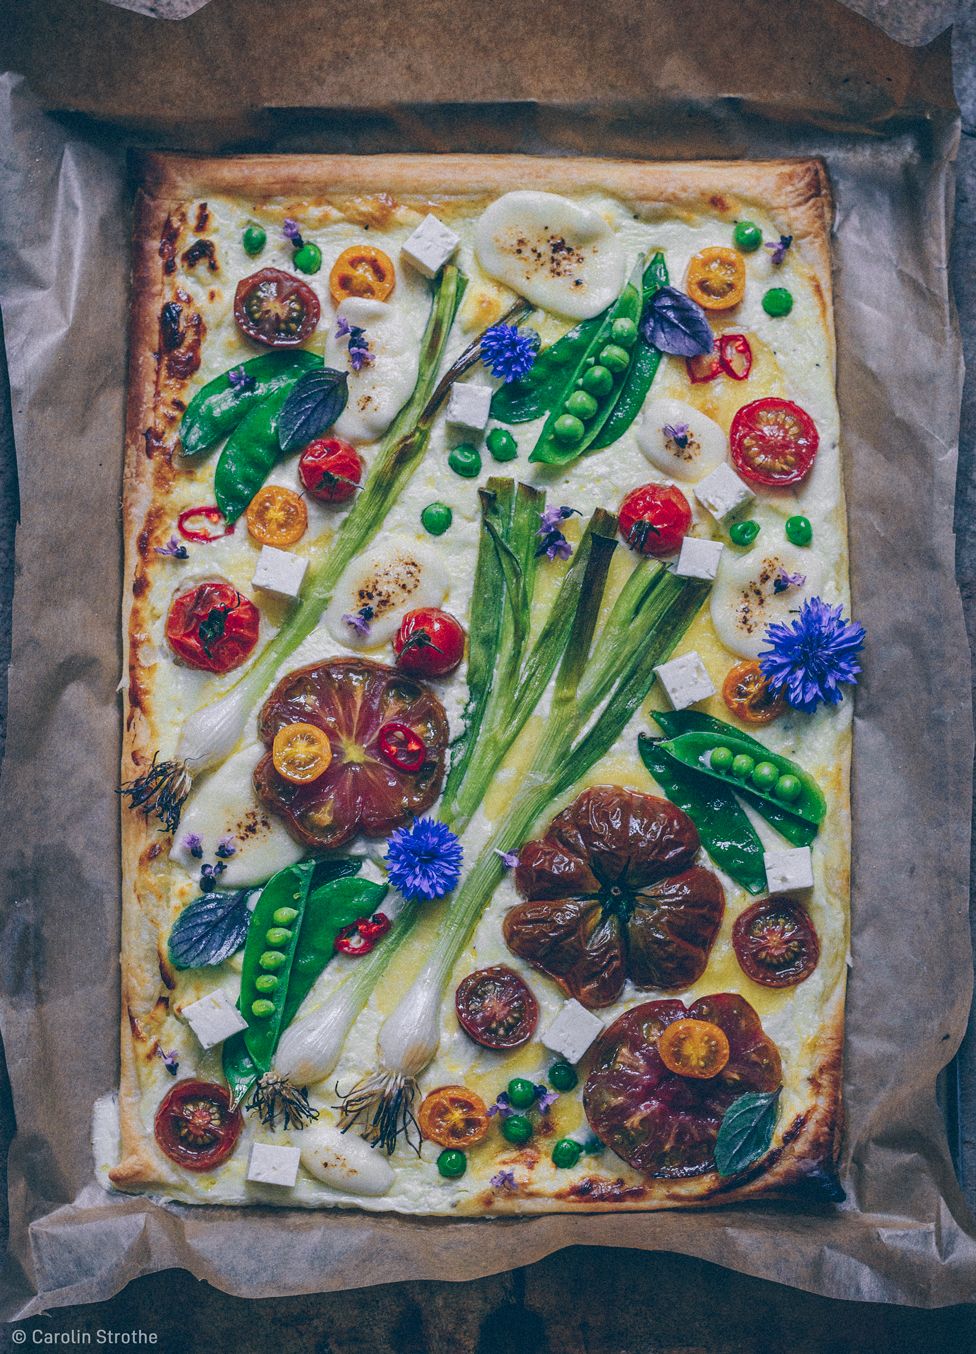 Colorful vegetable pie